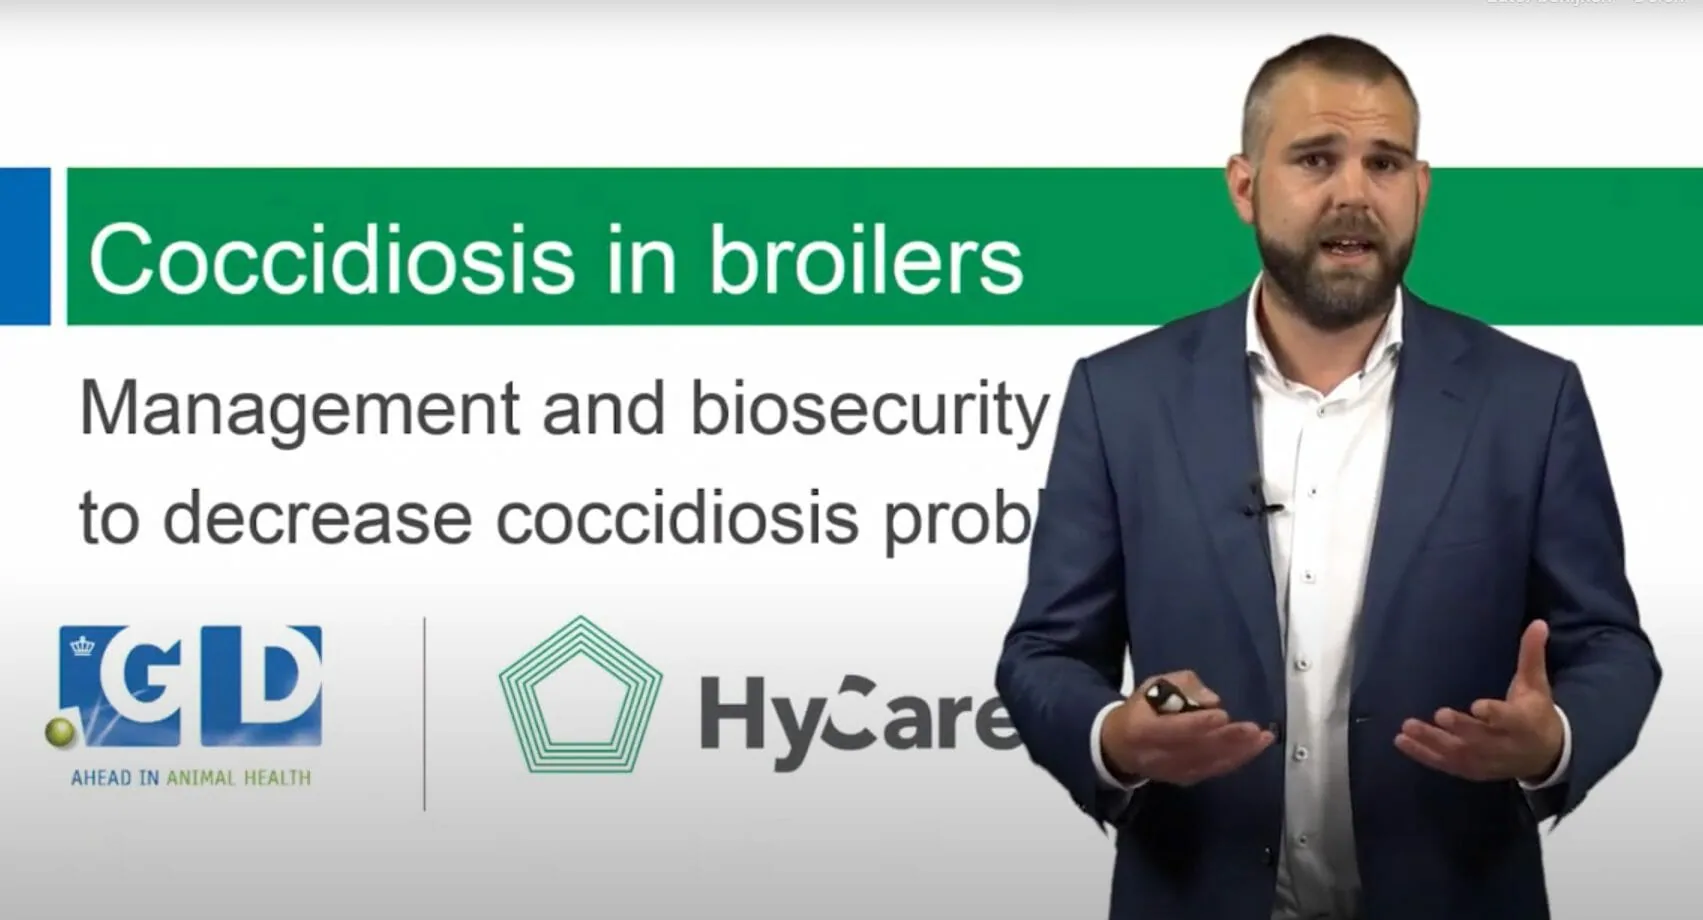 Webinar Royal GD & HyCare_ Coccidiosis problems in broilers (EN)